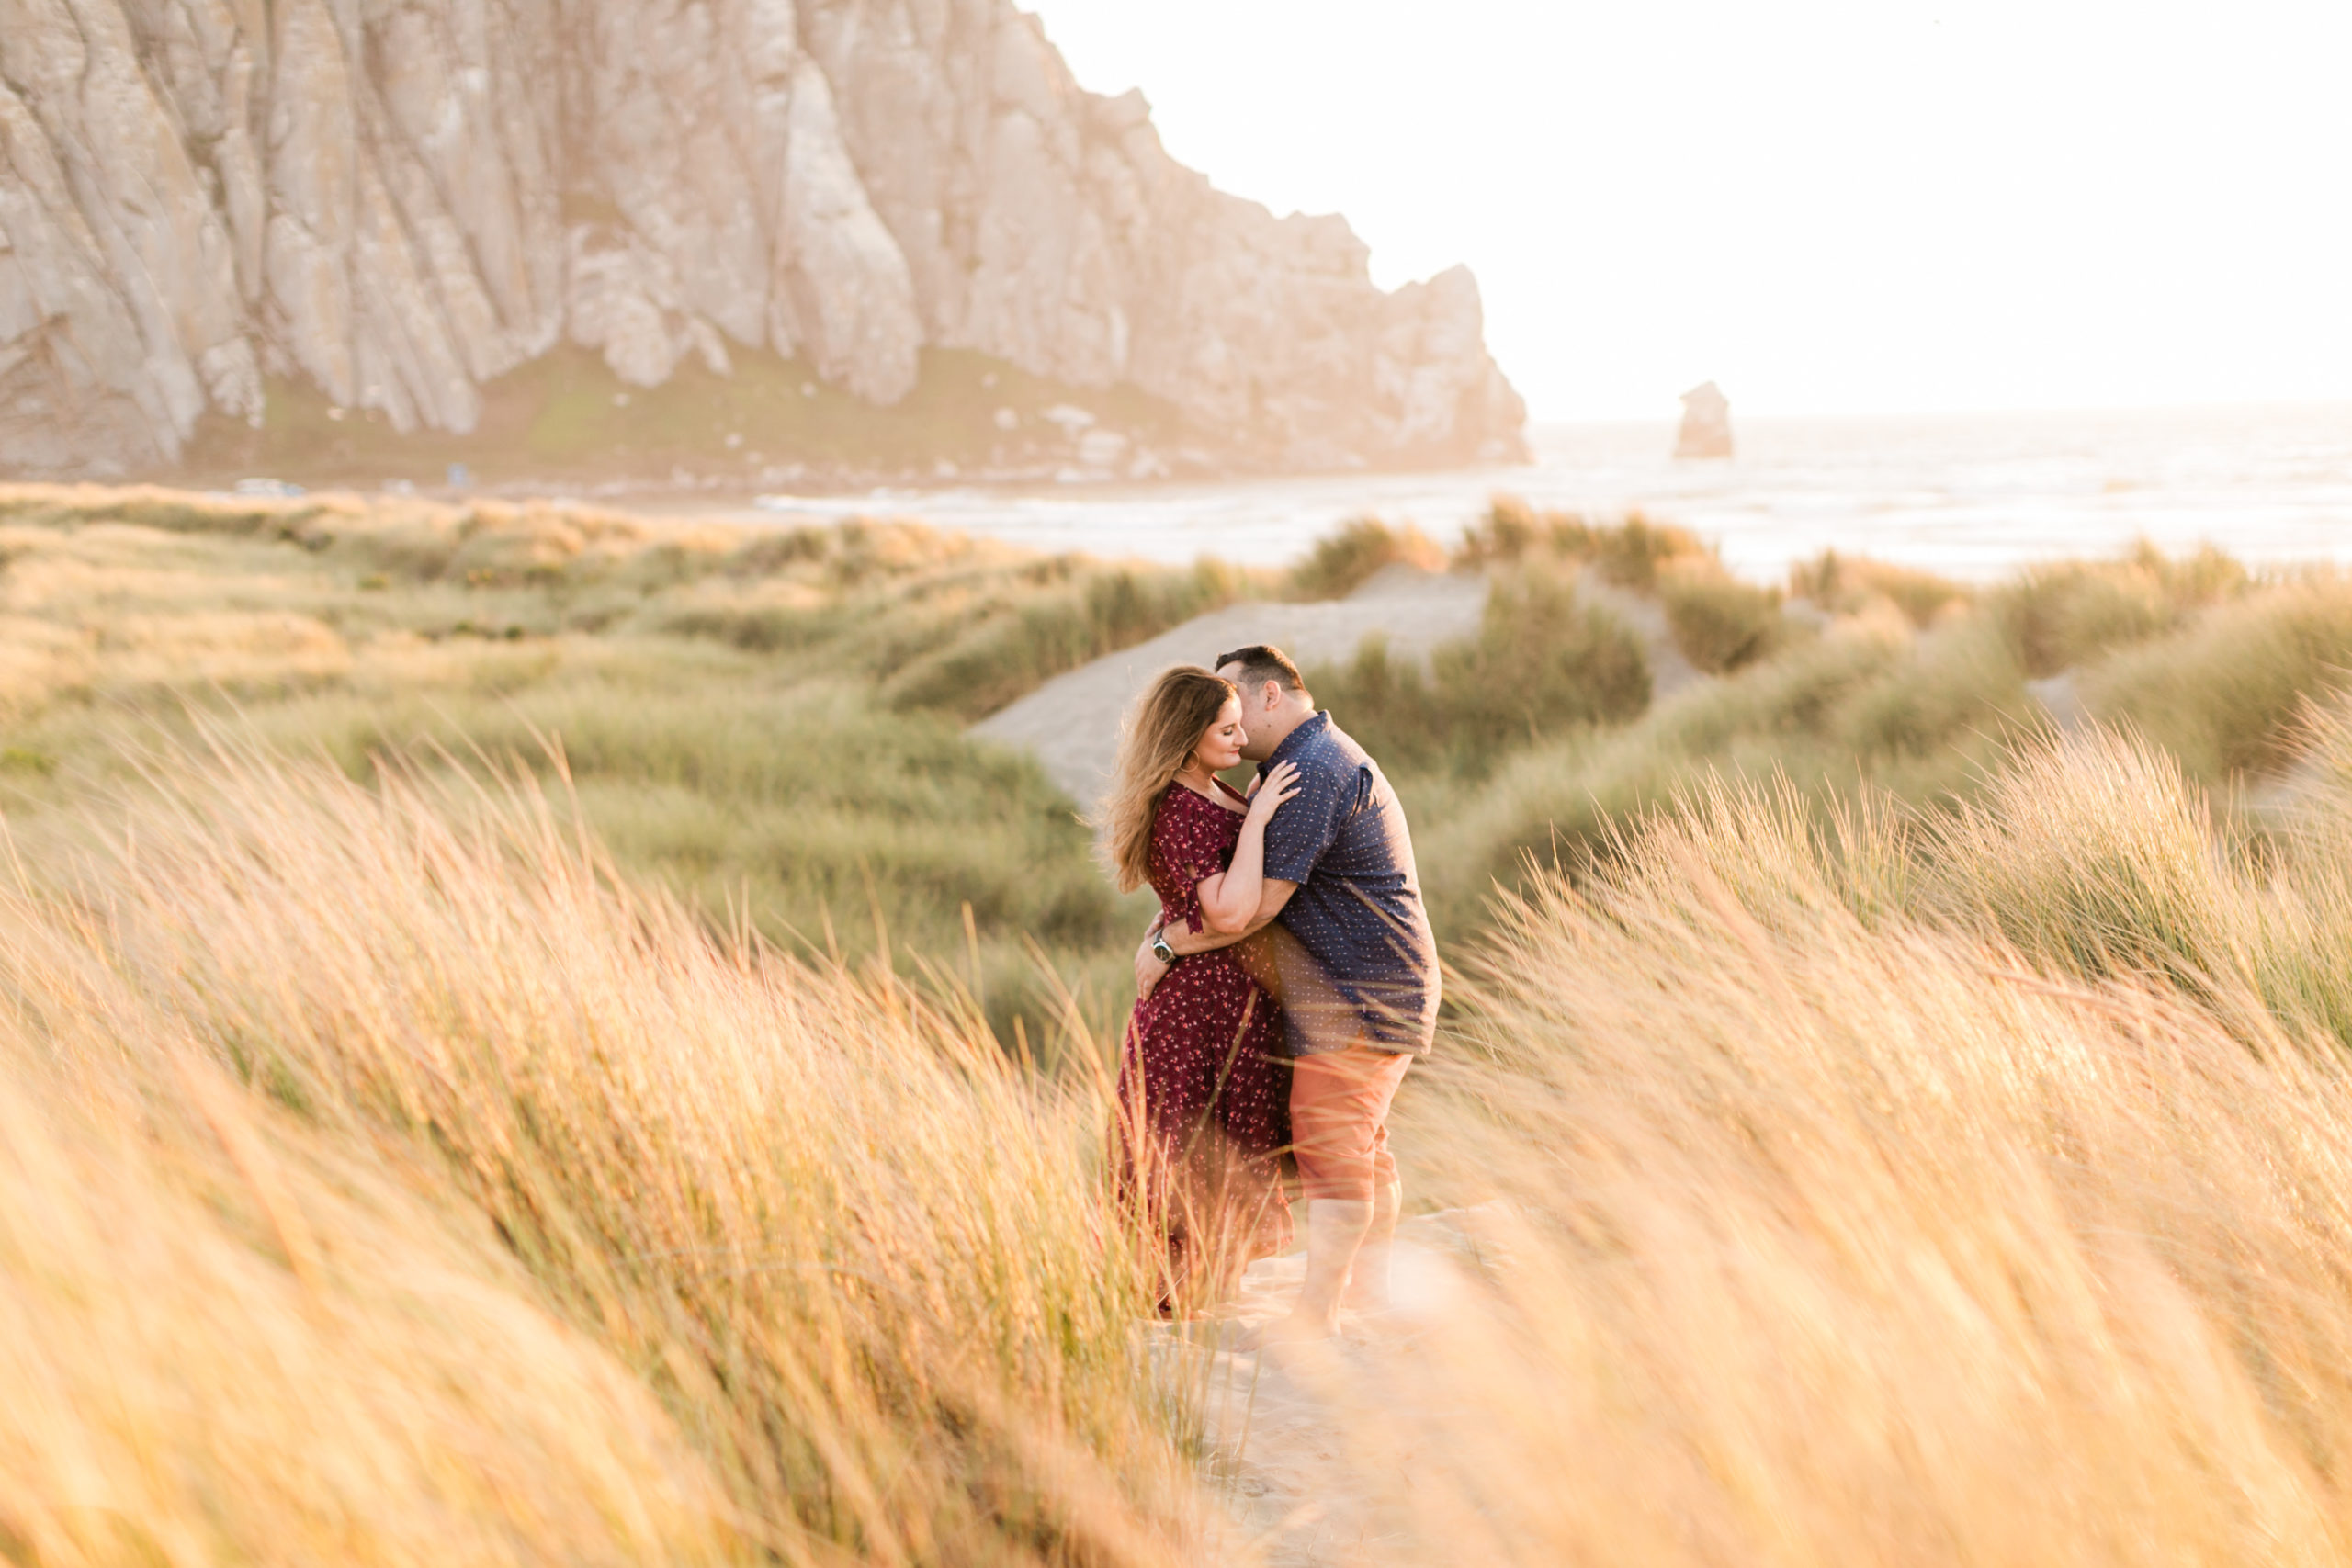 morro bay, california engagement session at sunset by Tayler Enerle